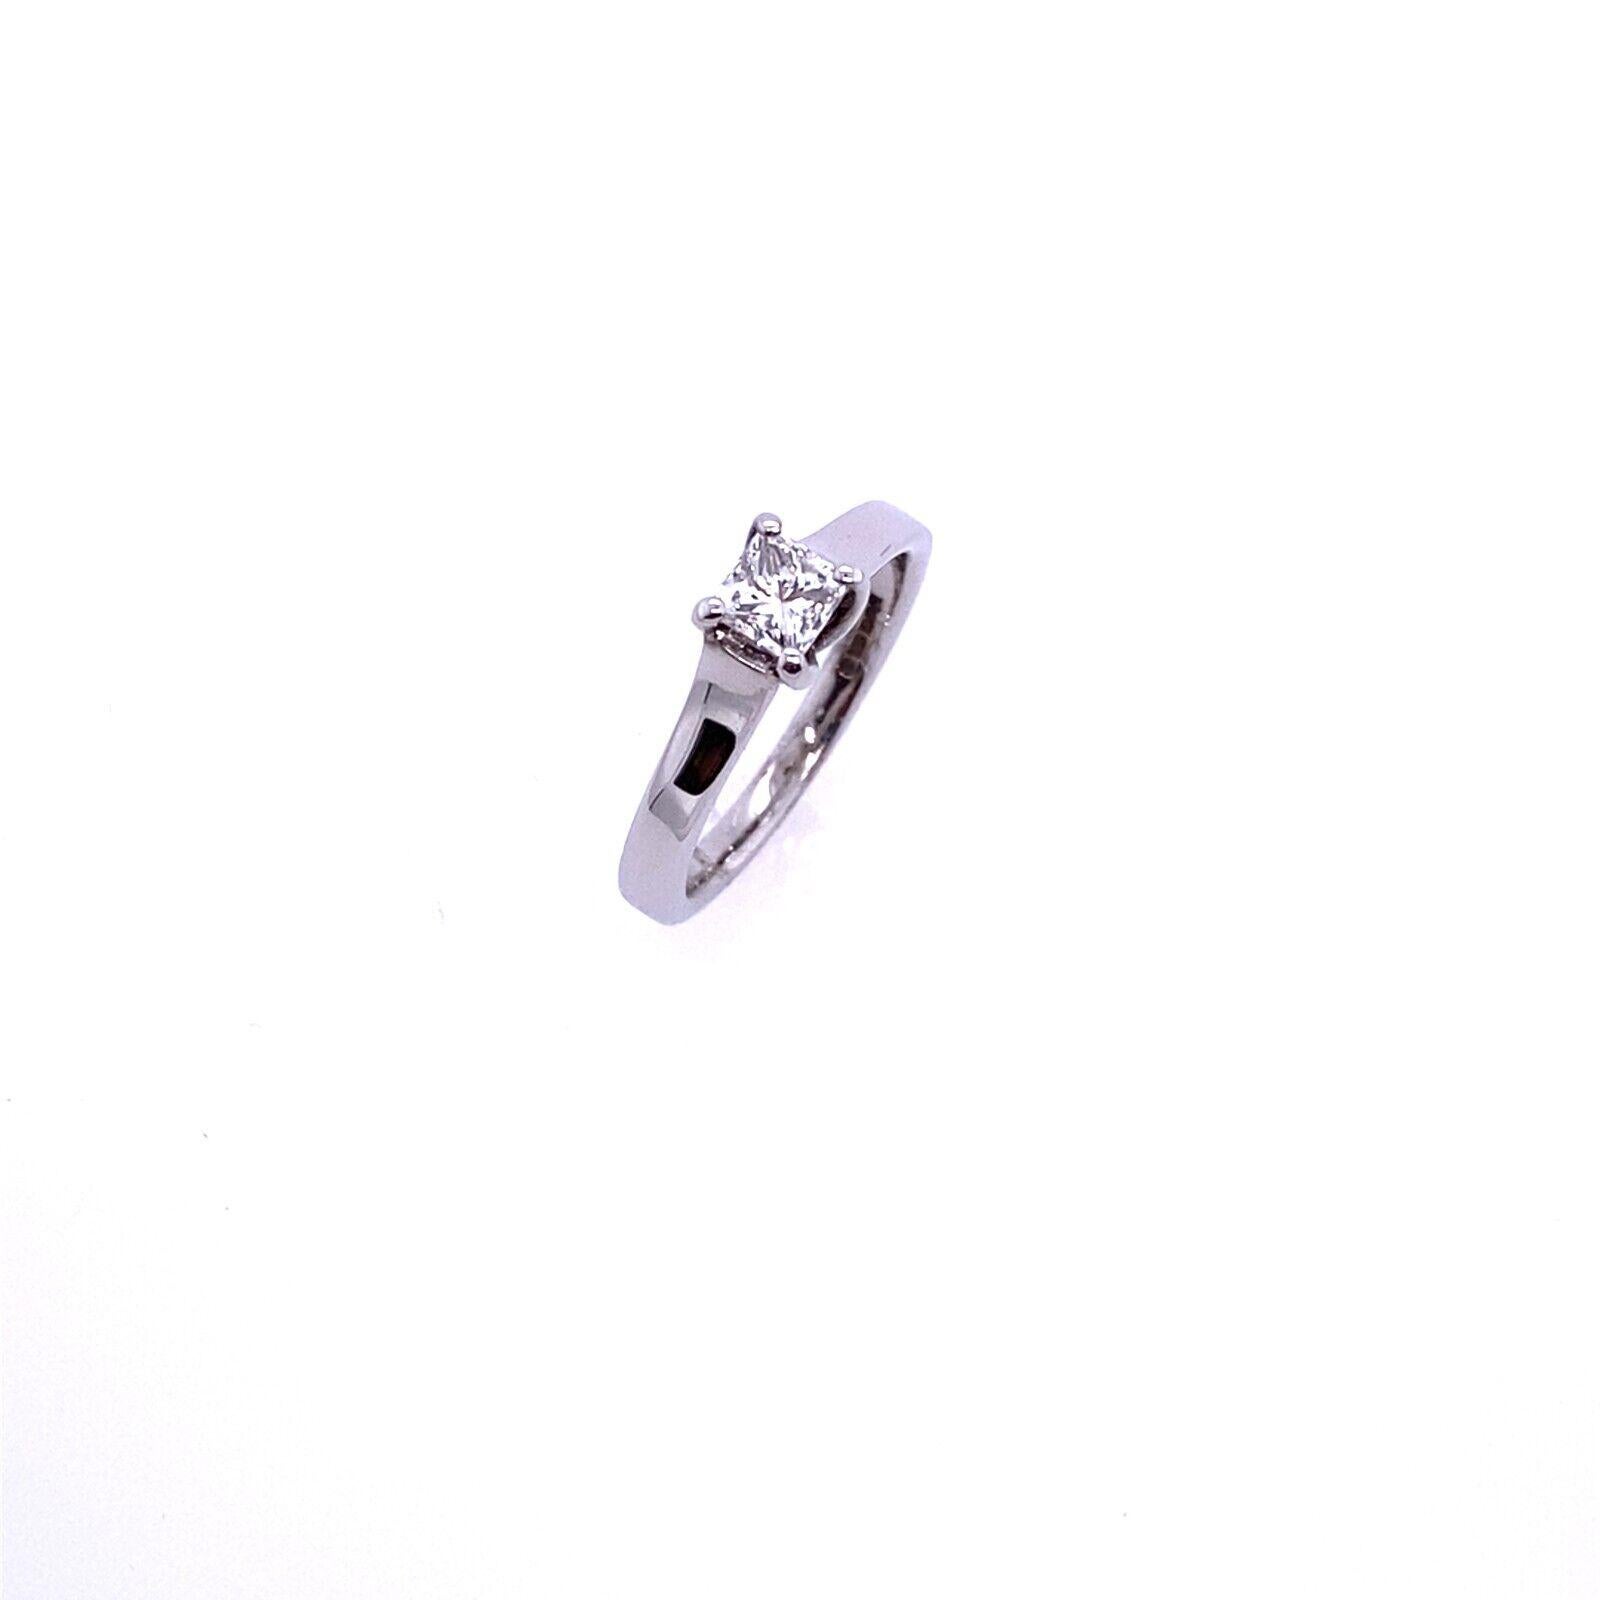 18ct White Gold Princess Cut Diamond Ring Set With a 0.35ct G SI1 Diamond

The 18ct White Gold band is set with a 0.35ct diamond at its centre.

Additional Information: 
Total Diamond Weight: 0.35ct
Diamond Colour: G
Diamond Clarity: SI1
Gold